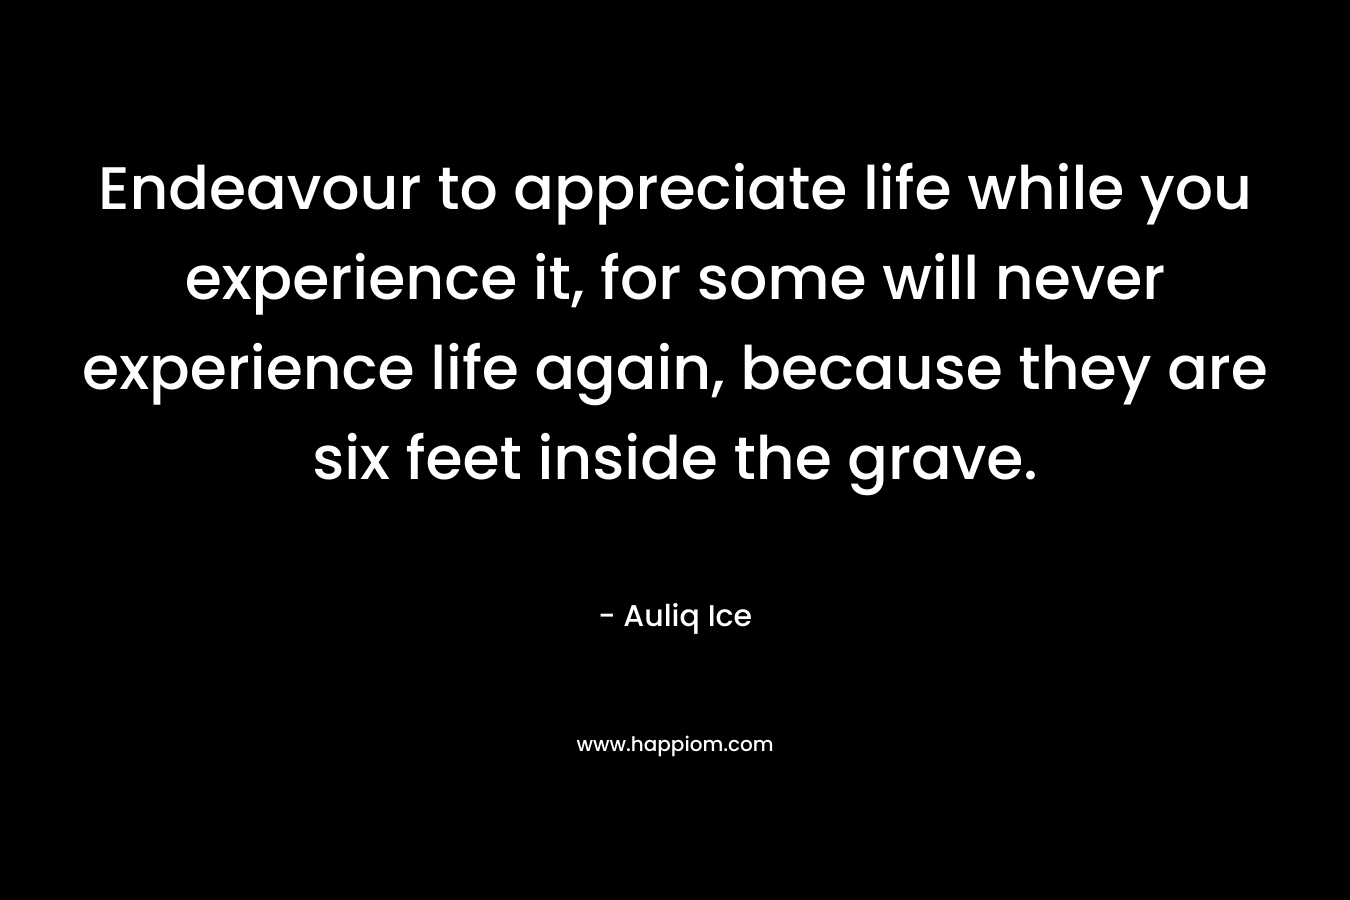 Endeavour to appreciate life while you experience it, for some will never experience life again, because they are six feet inside the grave. – Auliq Ice